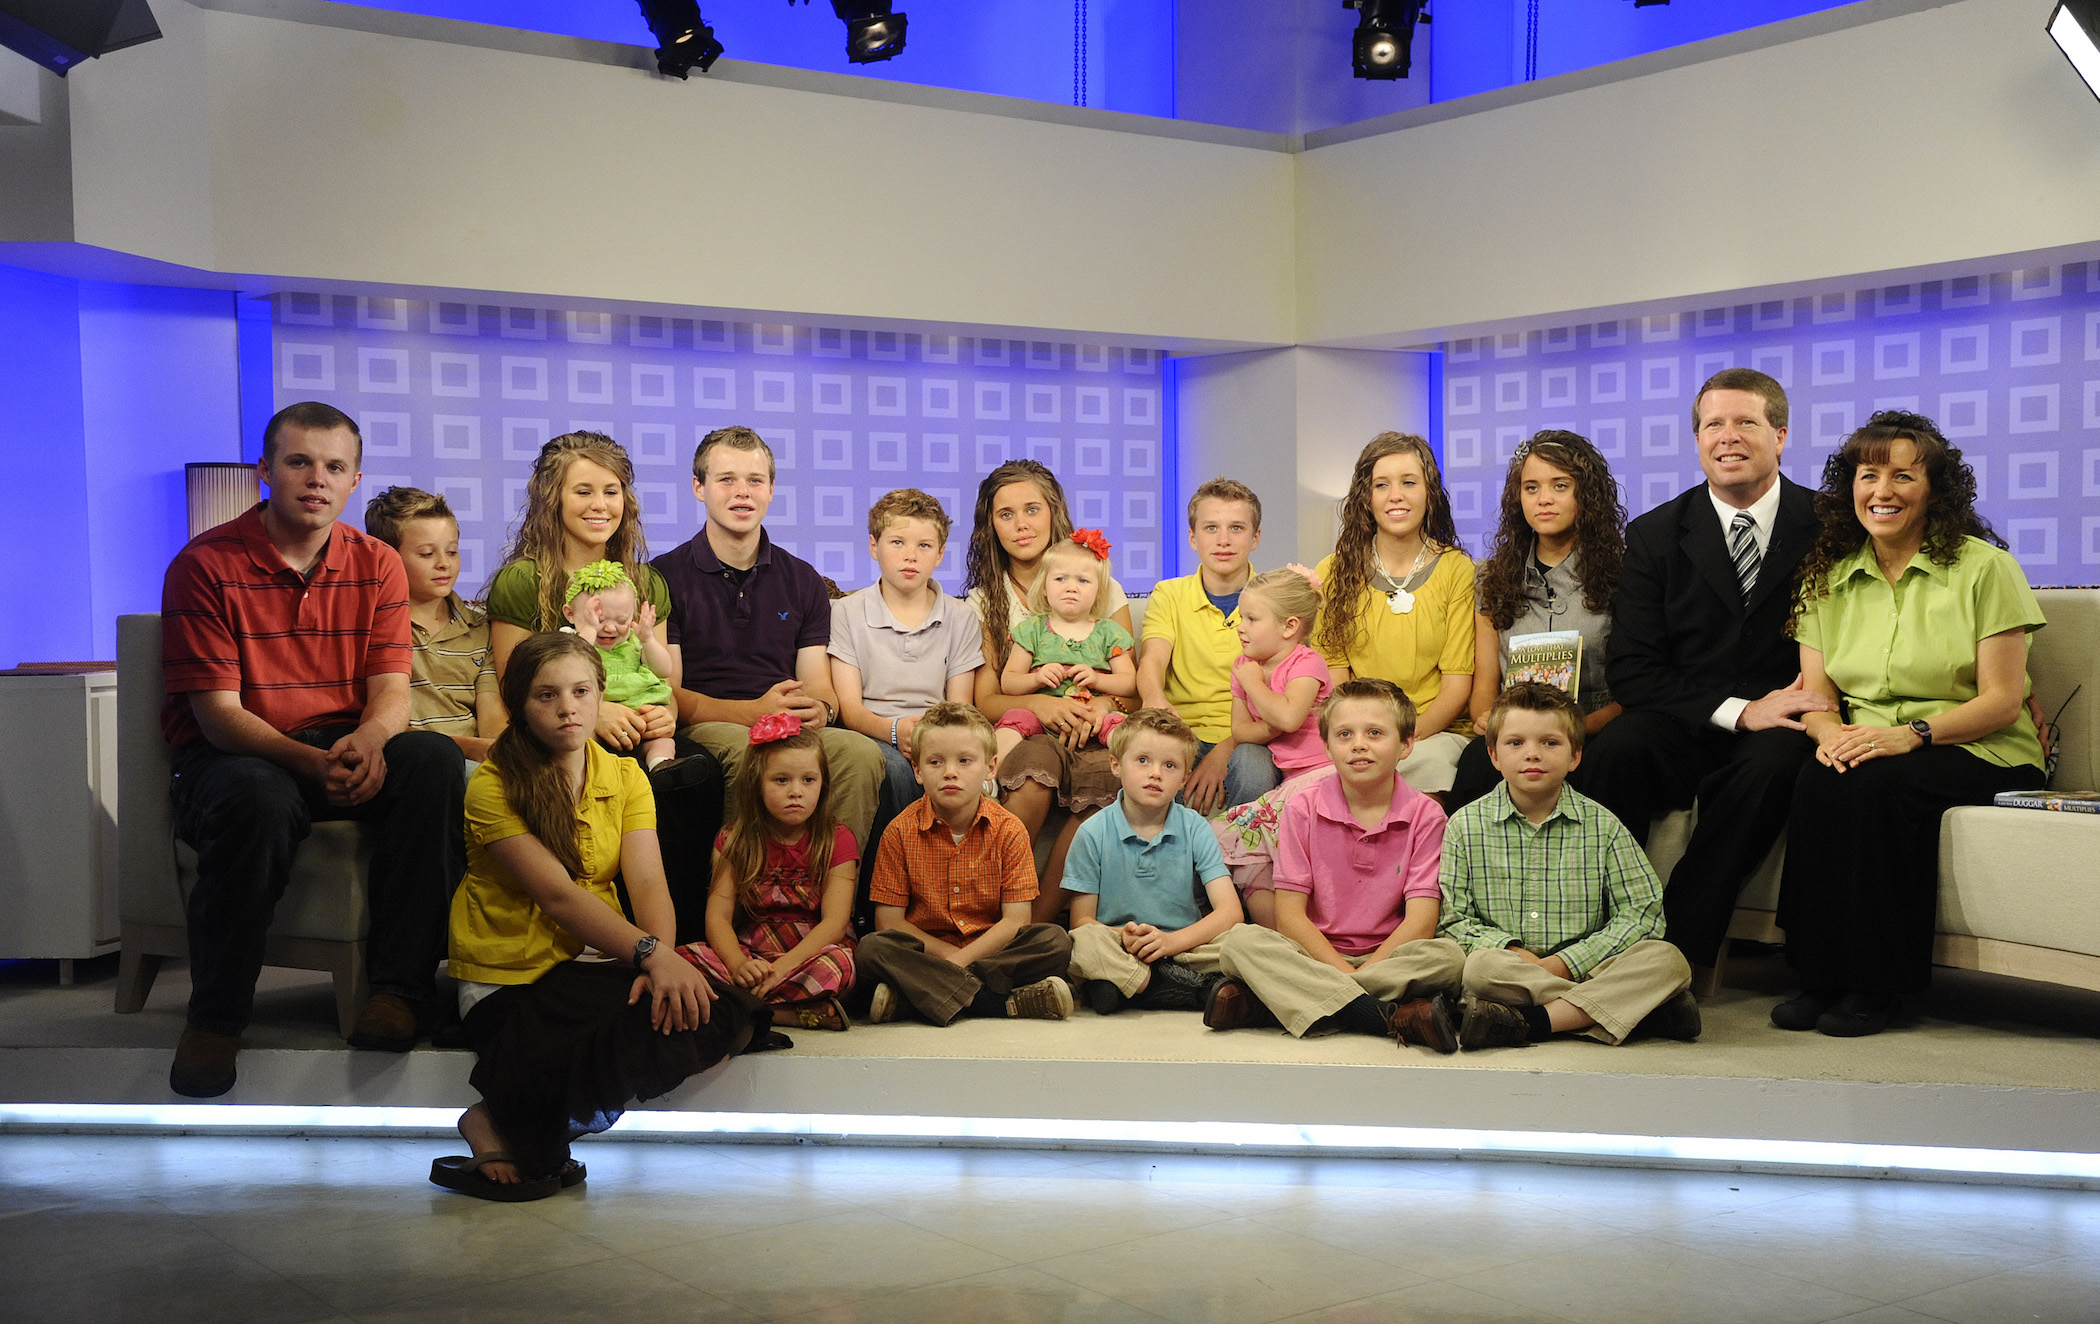 The Duggar family all sitting together on stage to appear on NBC News' 'Today' show